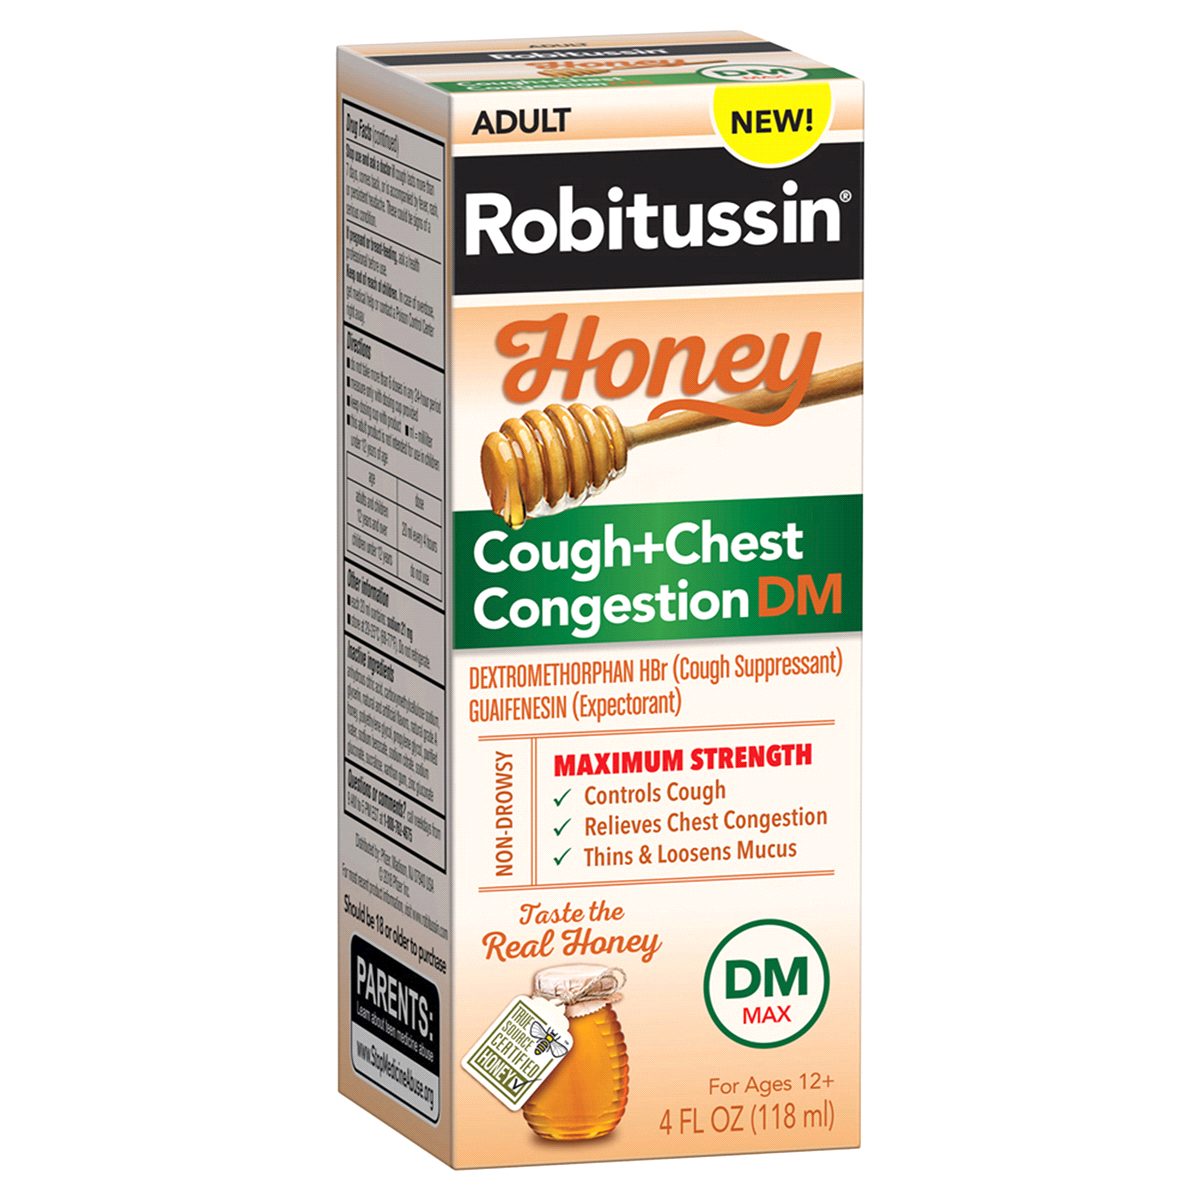 slide 5 of 5, Robitussin Maximum Strength Honey Cough + Chest Congestion DM, Cough Medicine for Cough and Chest Congestion Relief Made with Real Honey - 4 Fl Oz Bottle, 4 oz